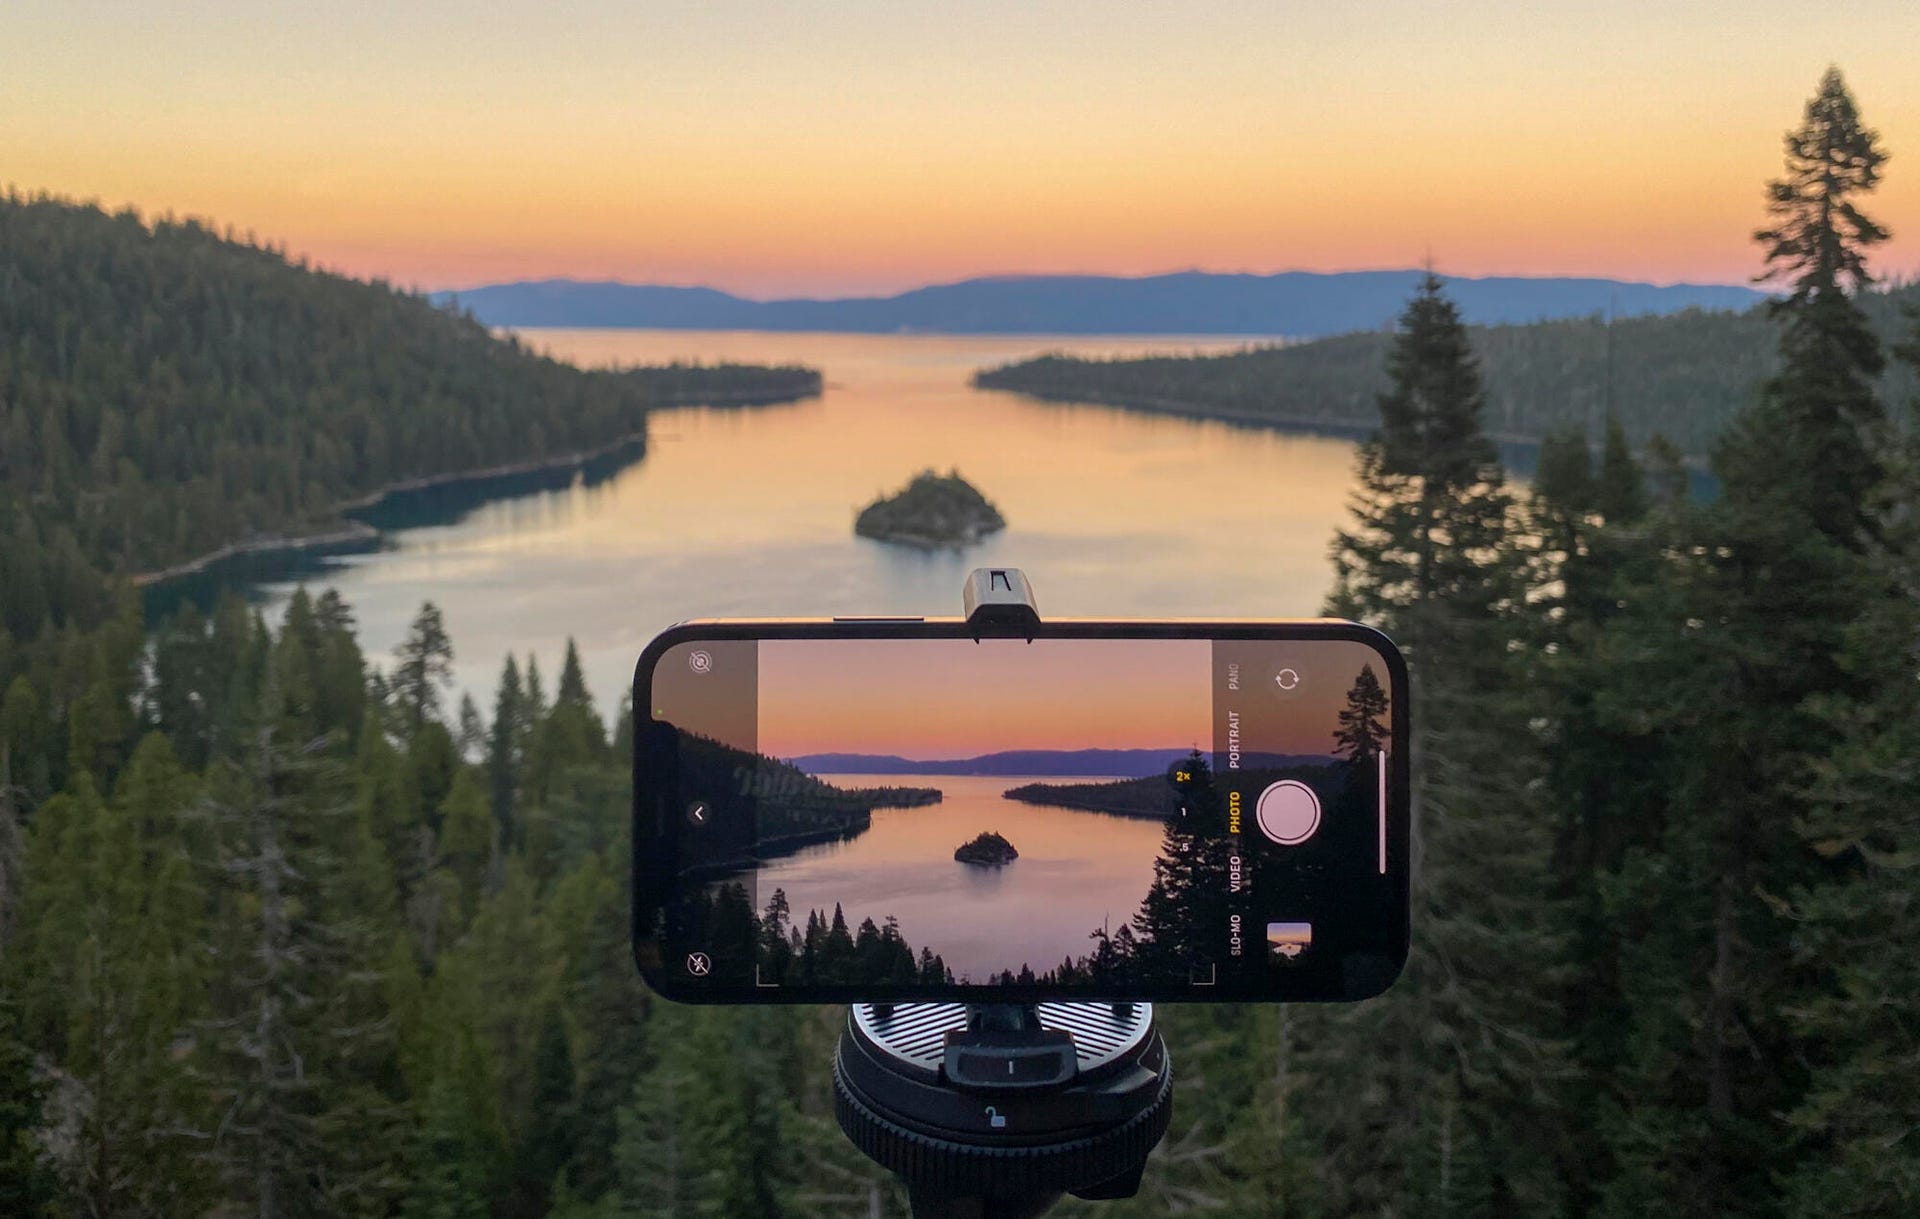 Shooting with the iPhone 12 Pro above Emerald Bay in Lake Tahoe, California.